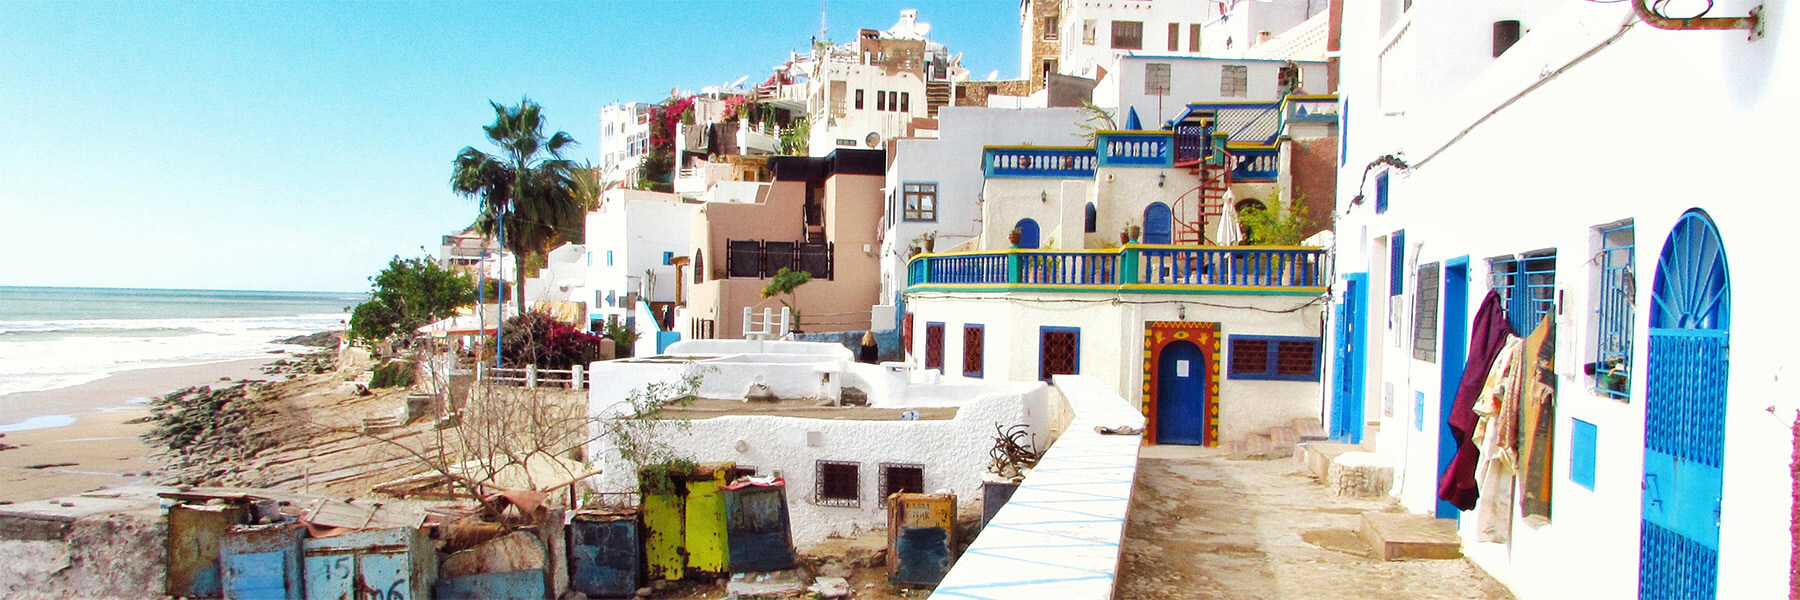 houses along the beach in Morocco